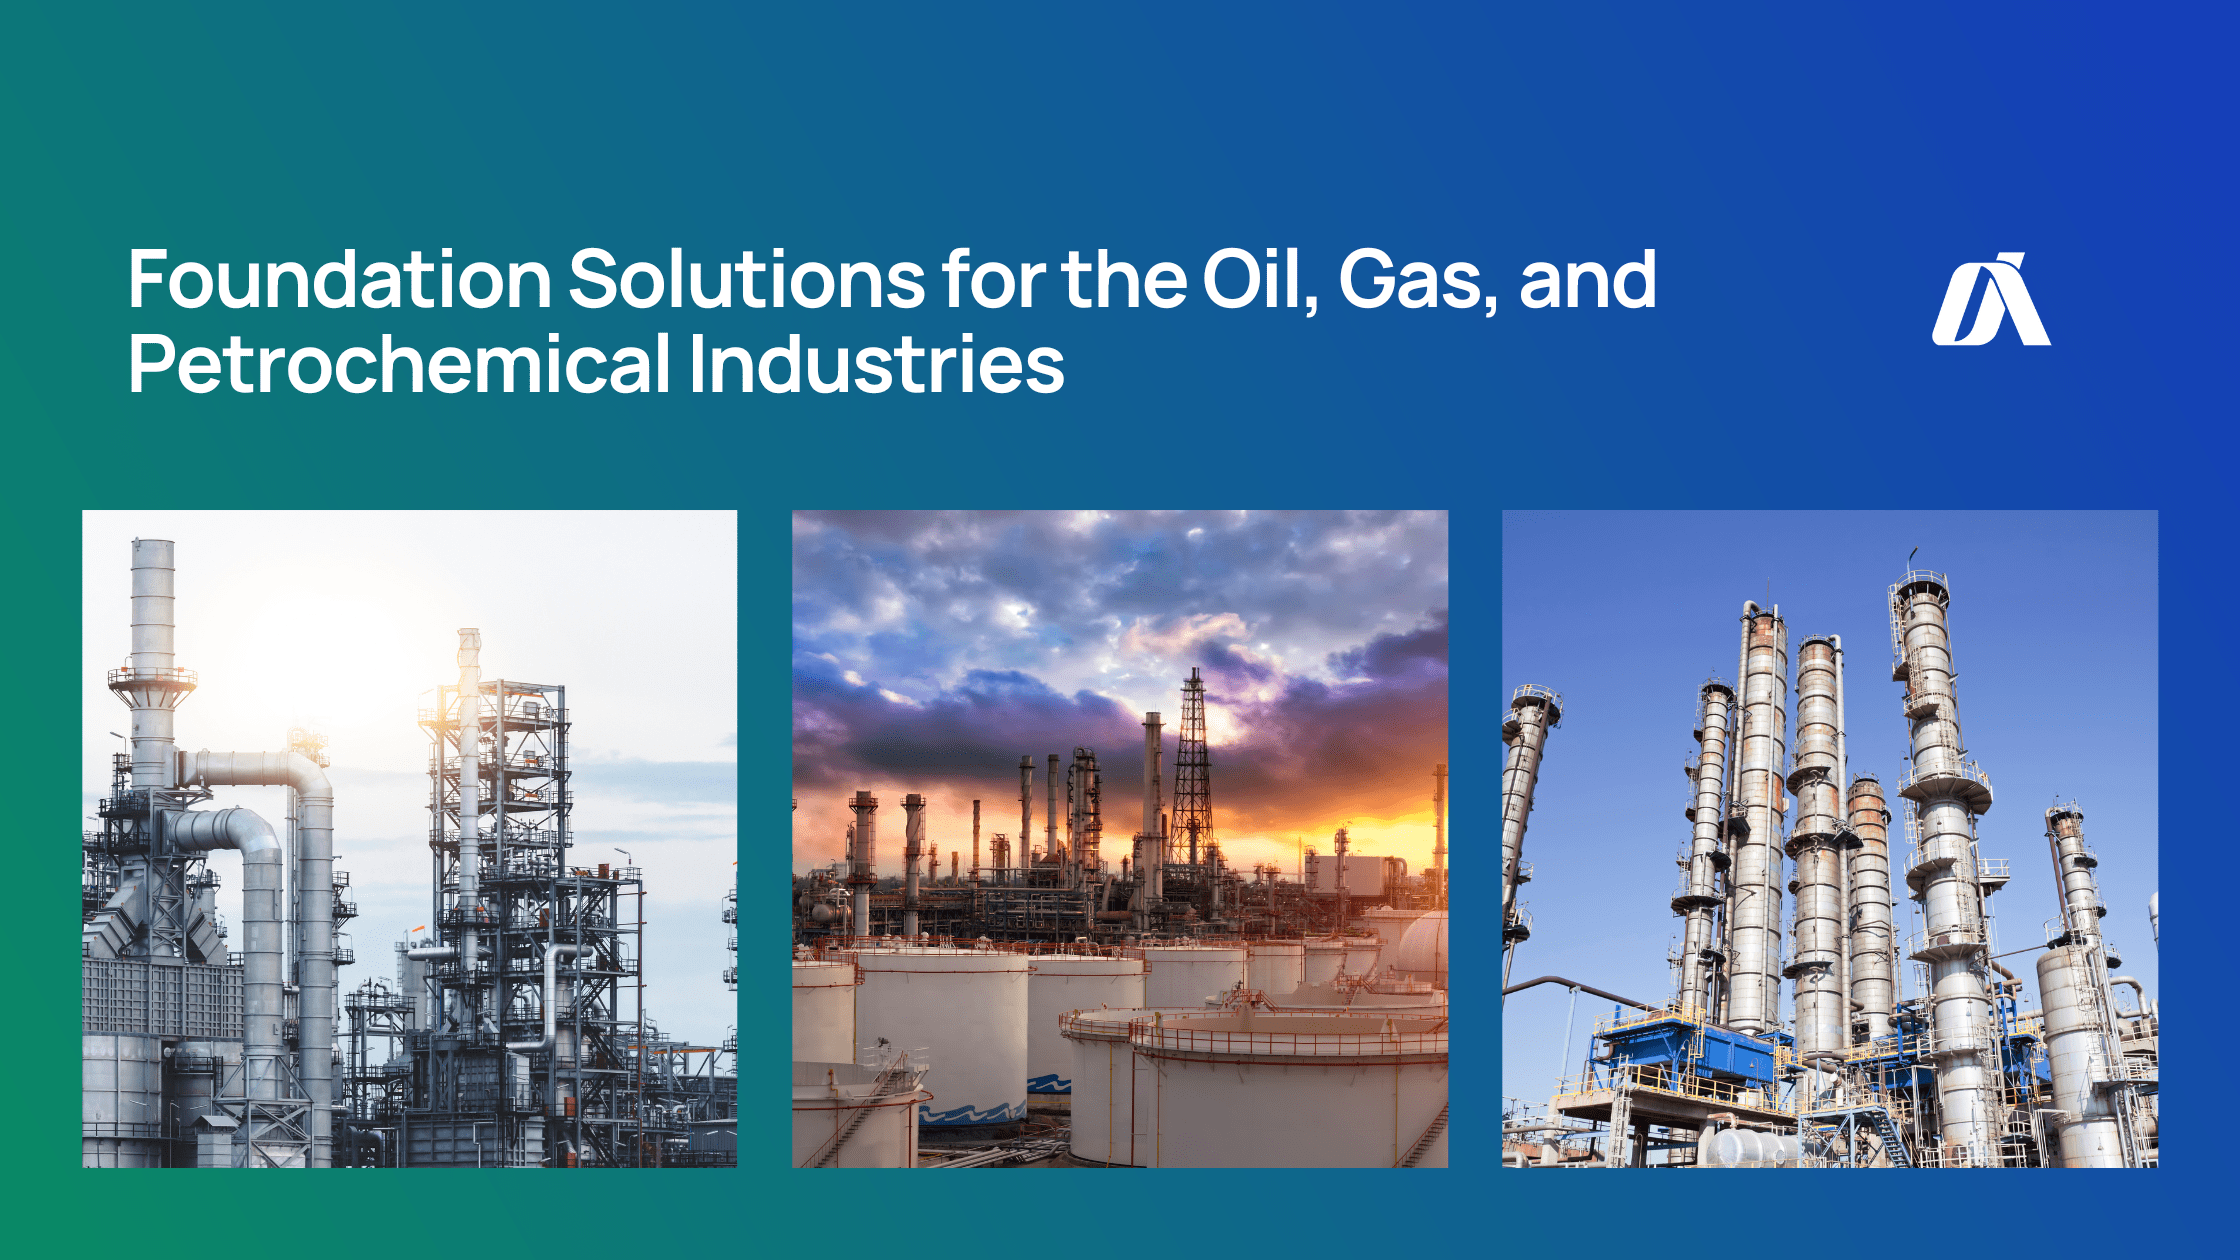 Oil, gas and petrochemical industry